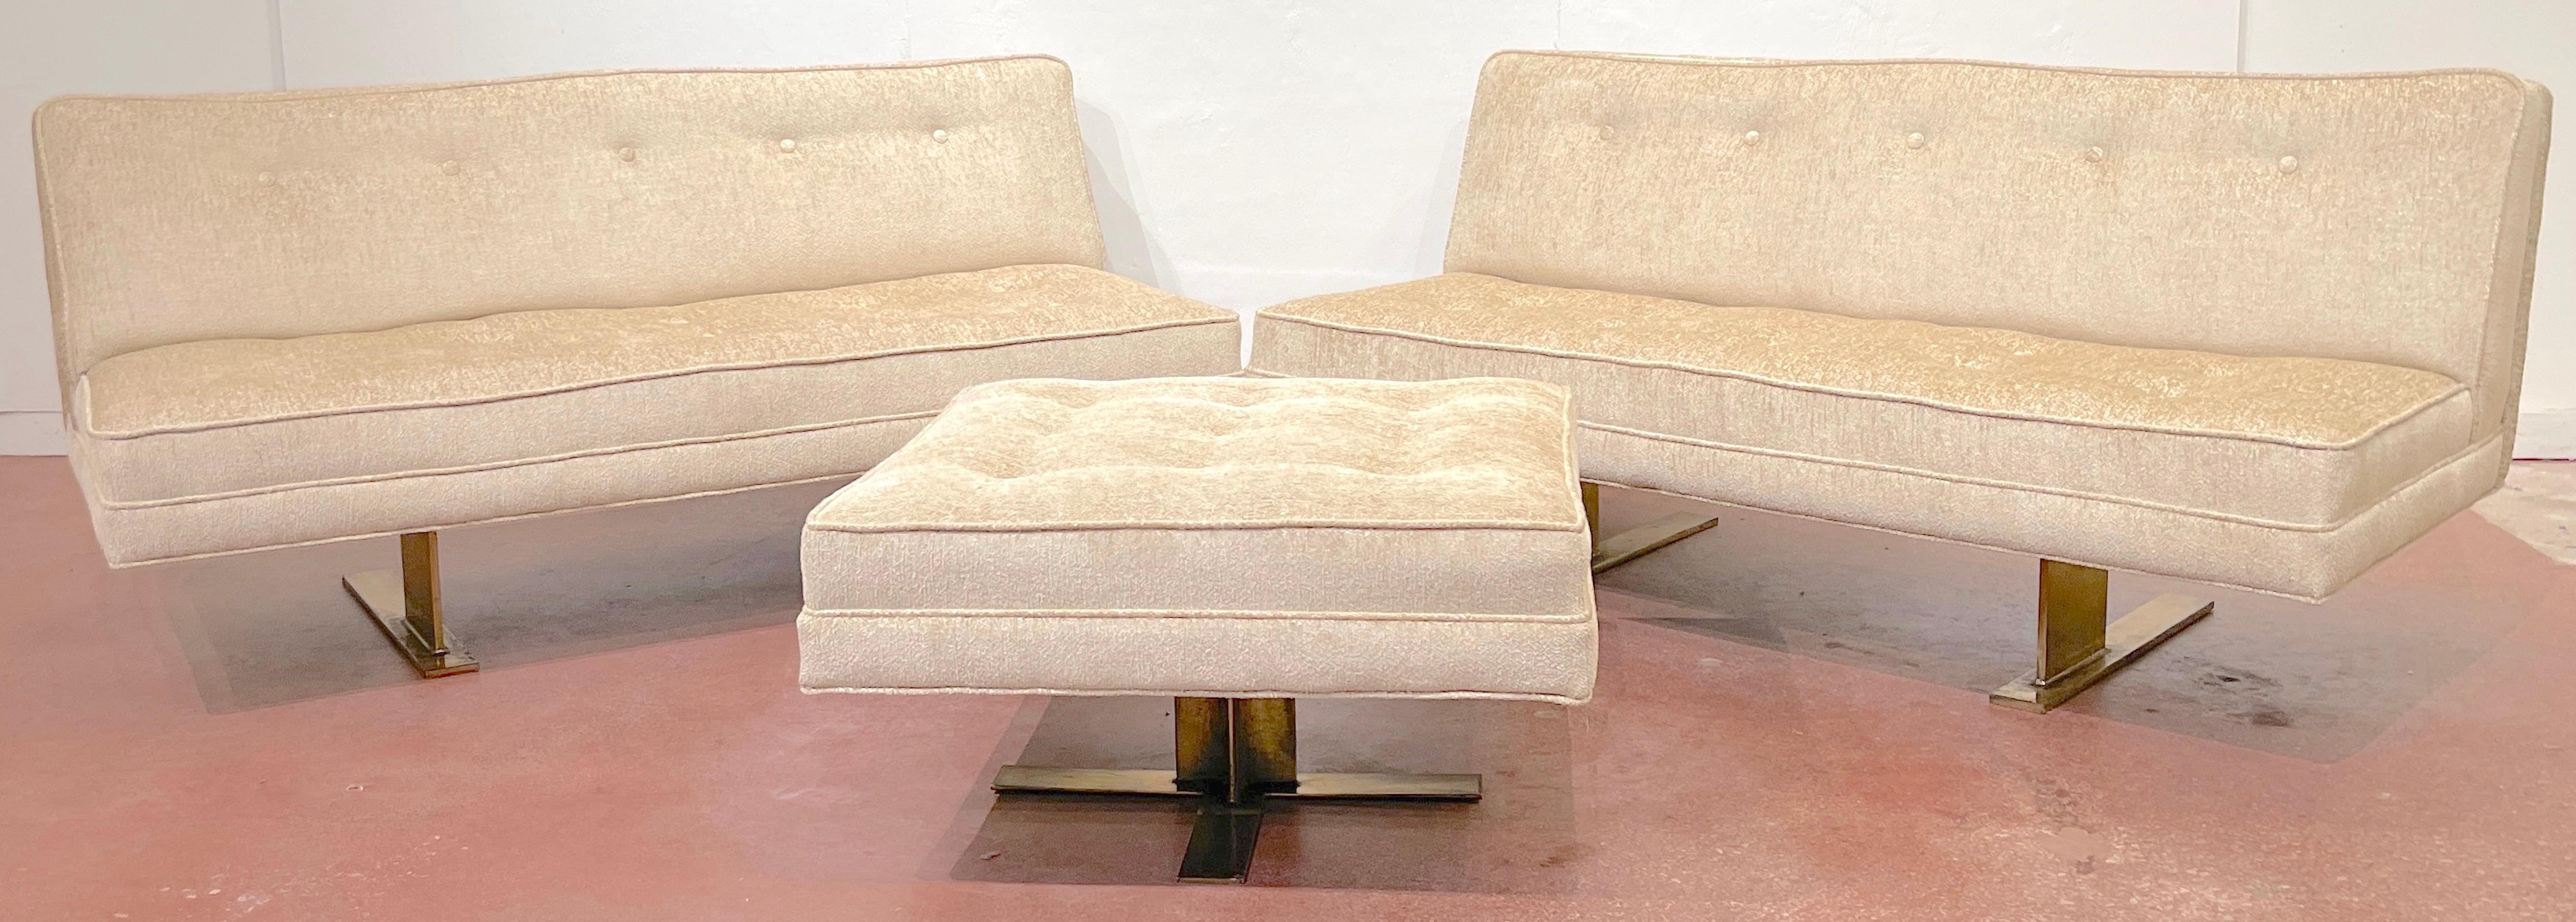 Italian Mid- Century sculptural bronze 'Floating' Sectional Set, Consisting of Two Sofas and One Ottoman 
Italy, 1970s, Recently upholstered.
Possibly by Marzio Cecchi 

We are pleased to offer this quietly stunning three piece cast bronze